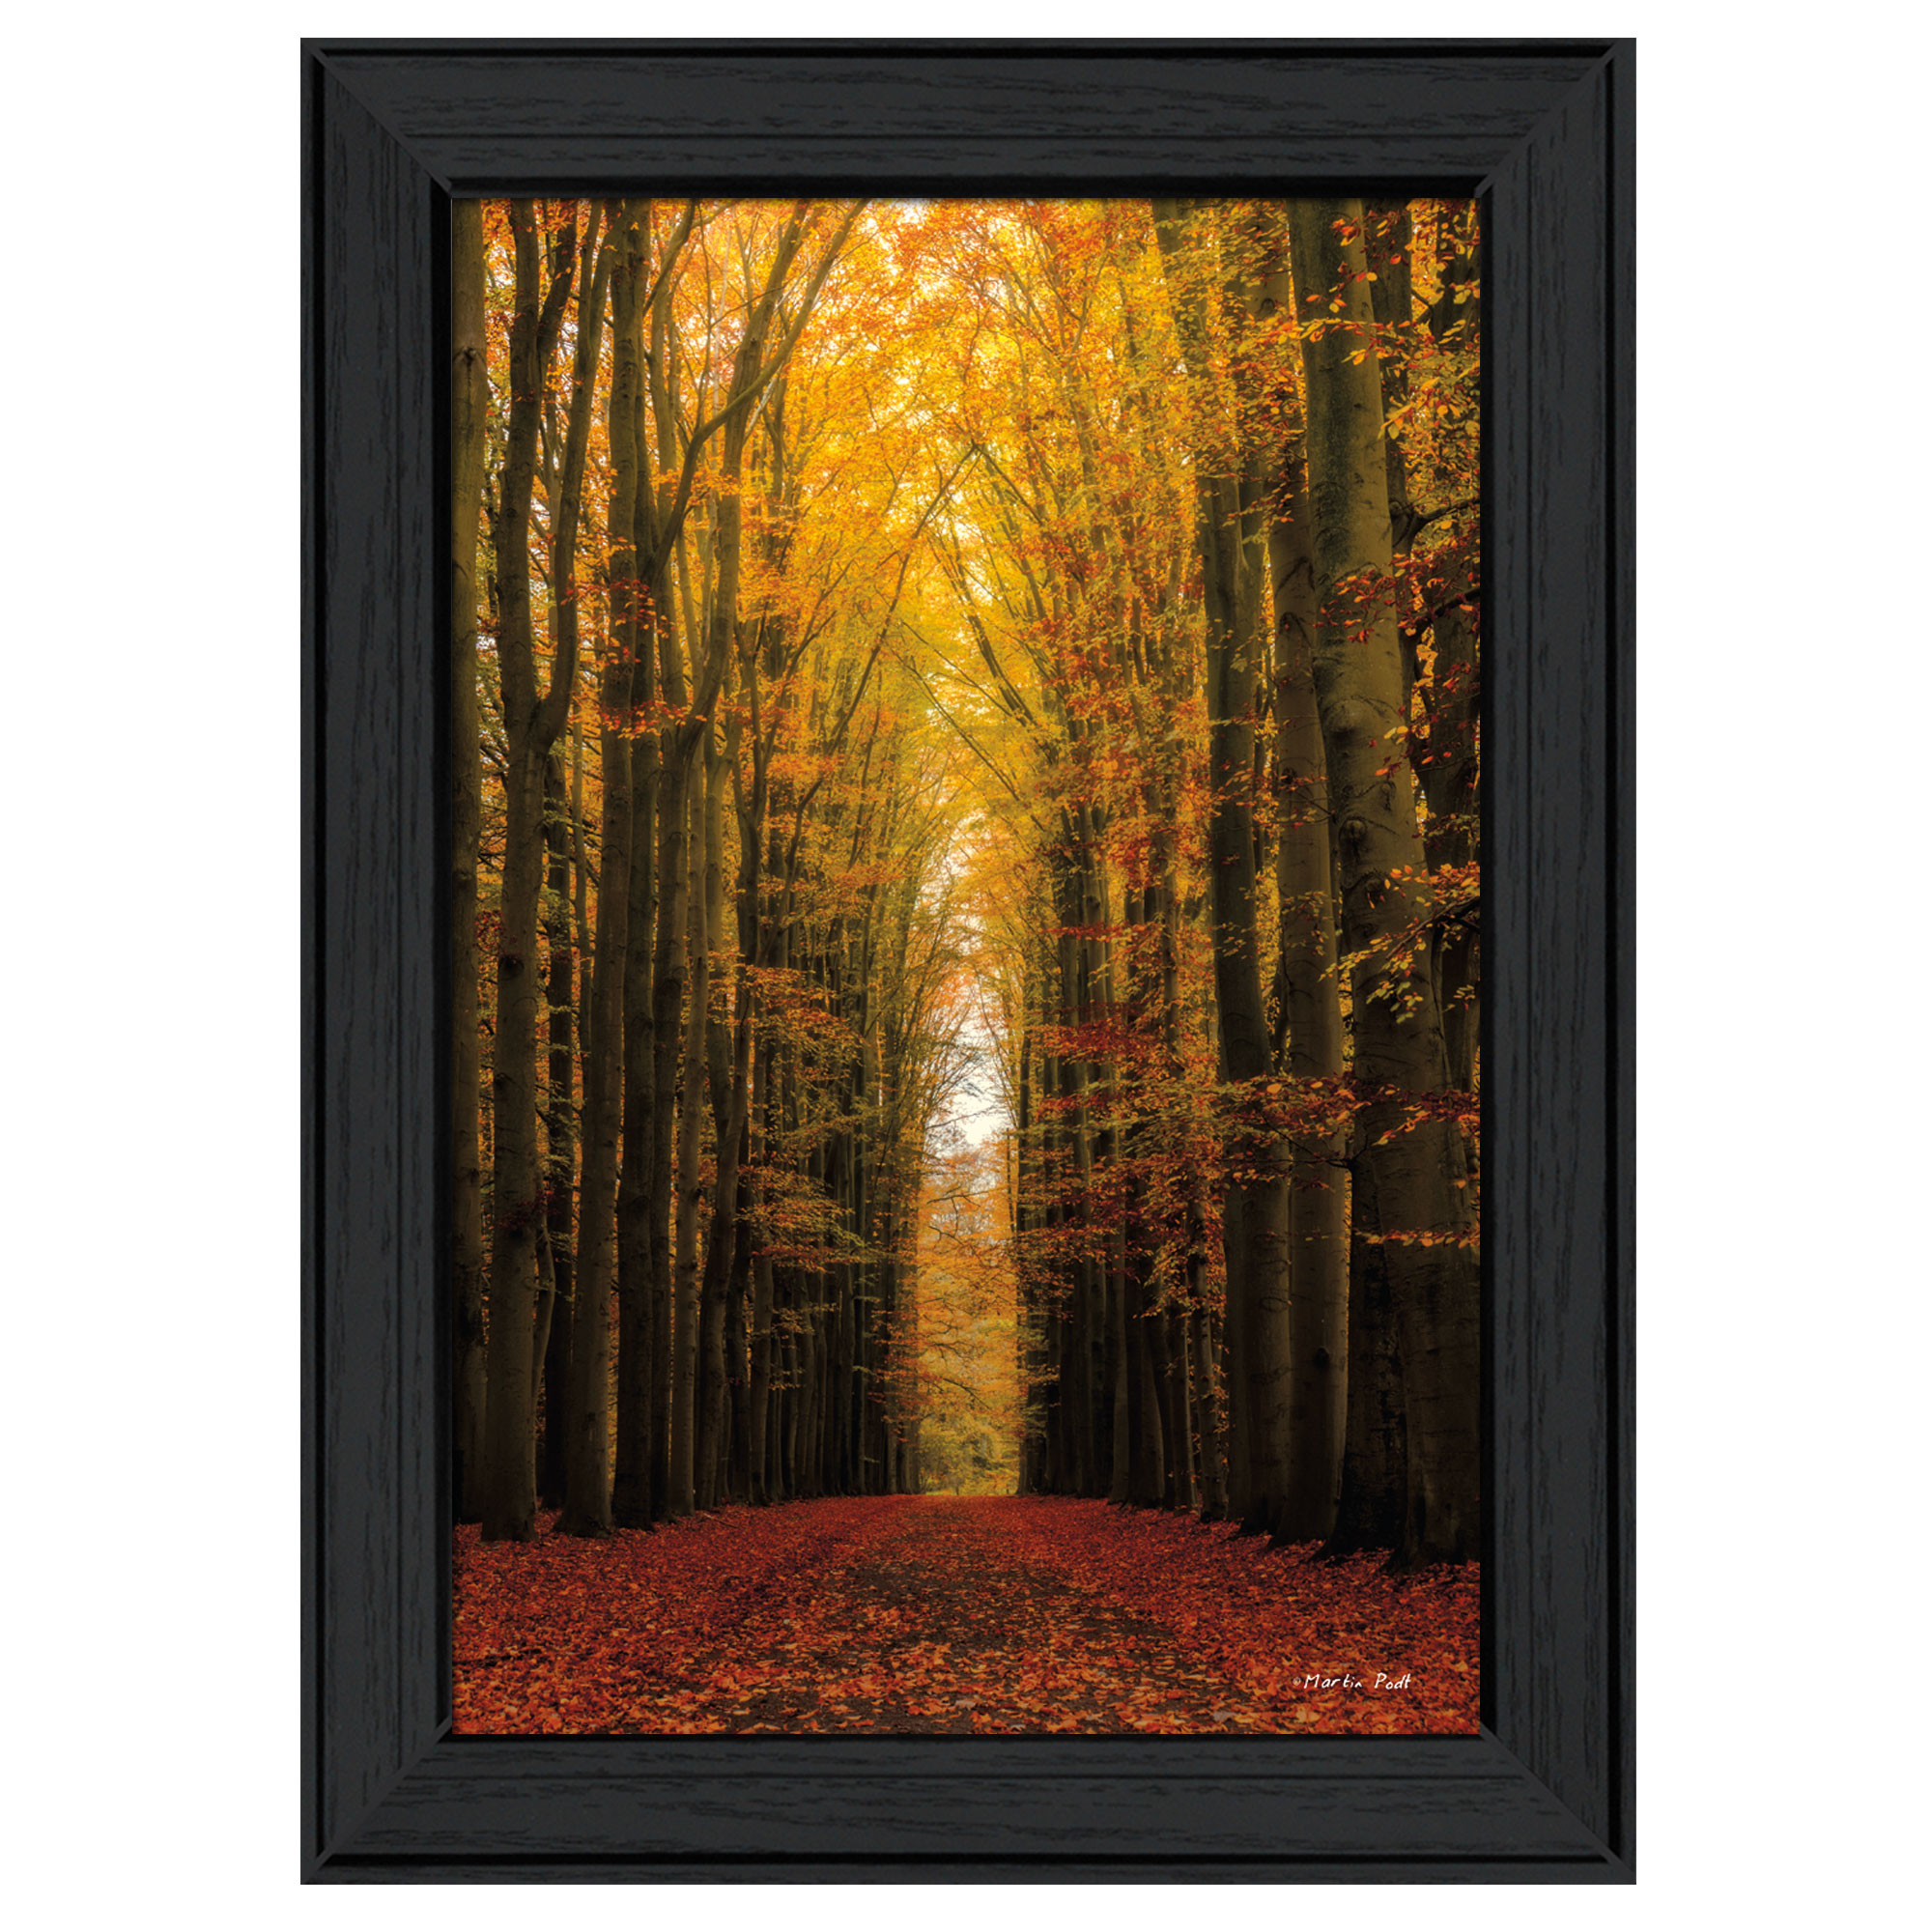 "Highway to Heaven" By Martin Podt, Printed Wall Art, Ready To Hang Framed Poster, Black Frame